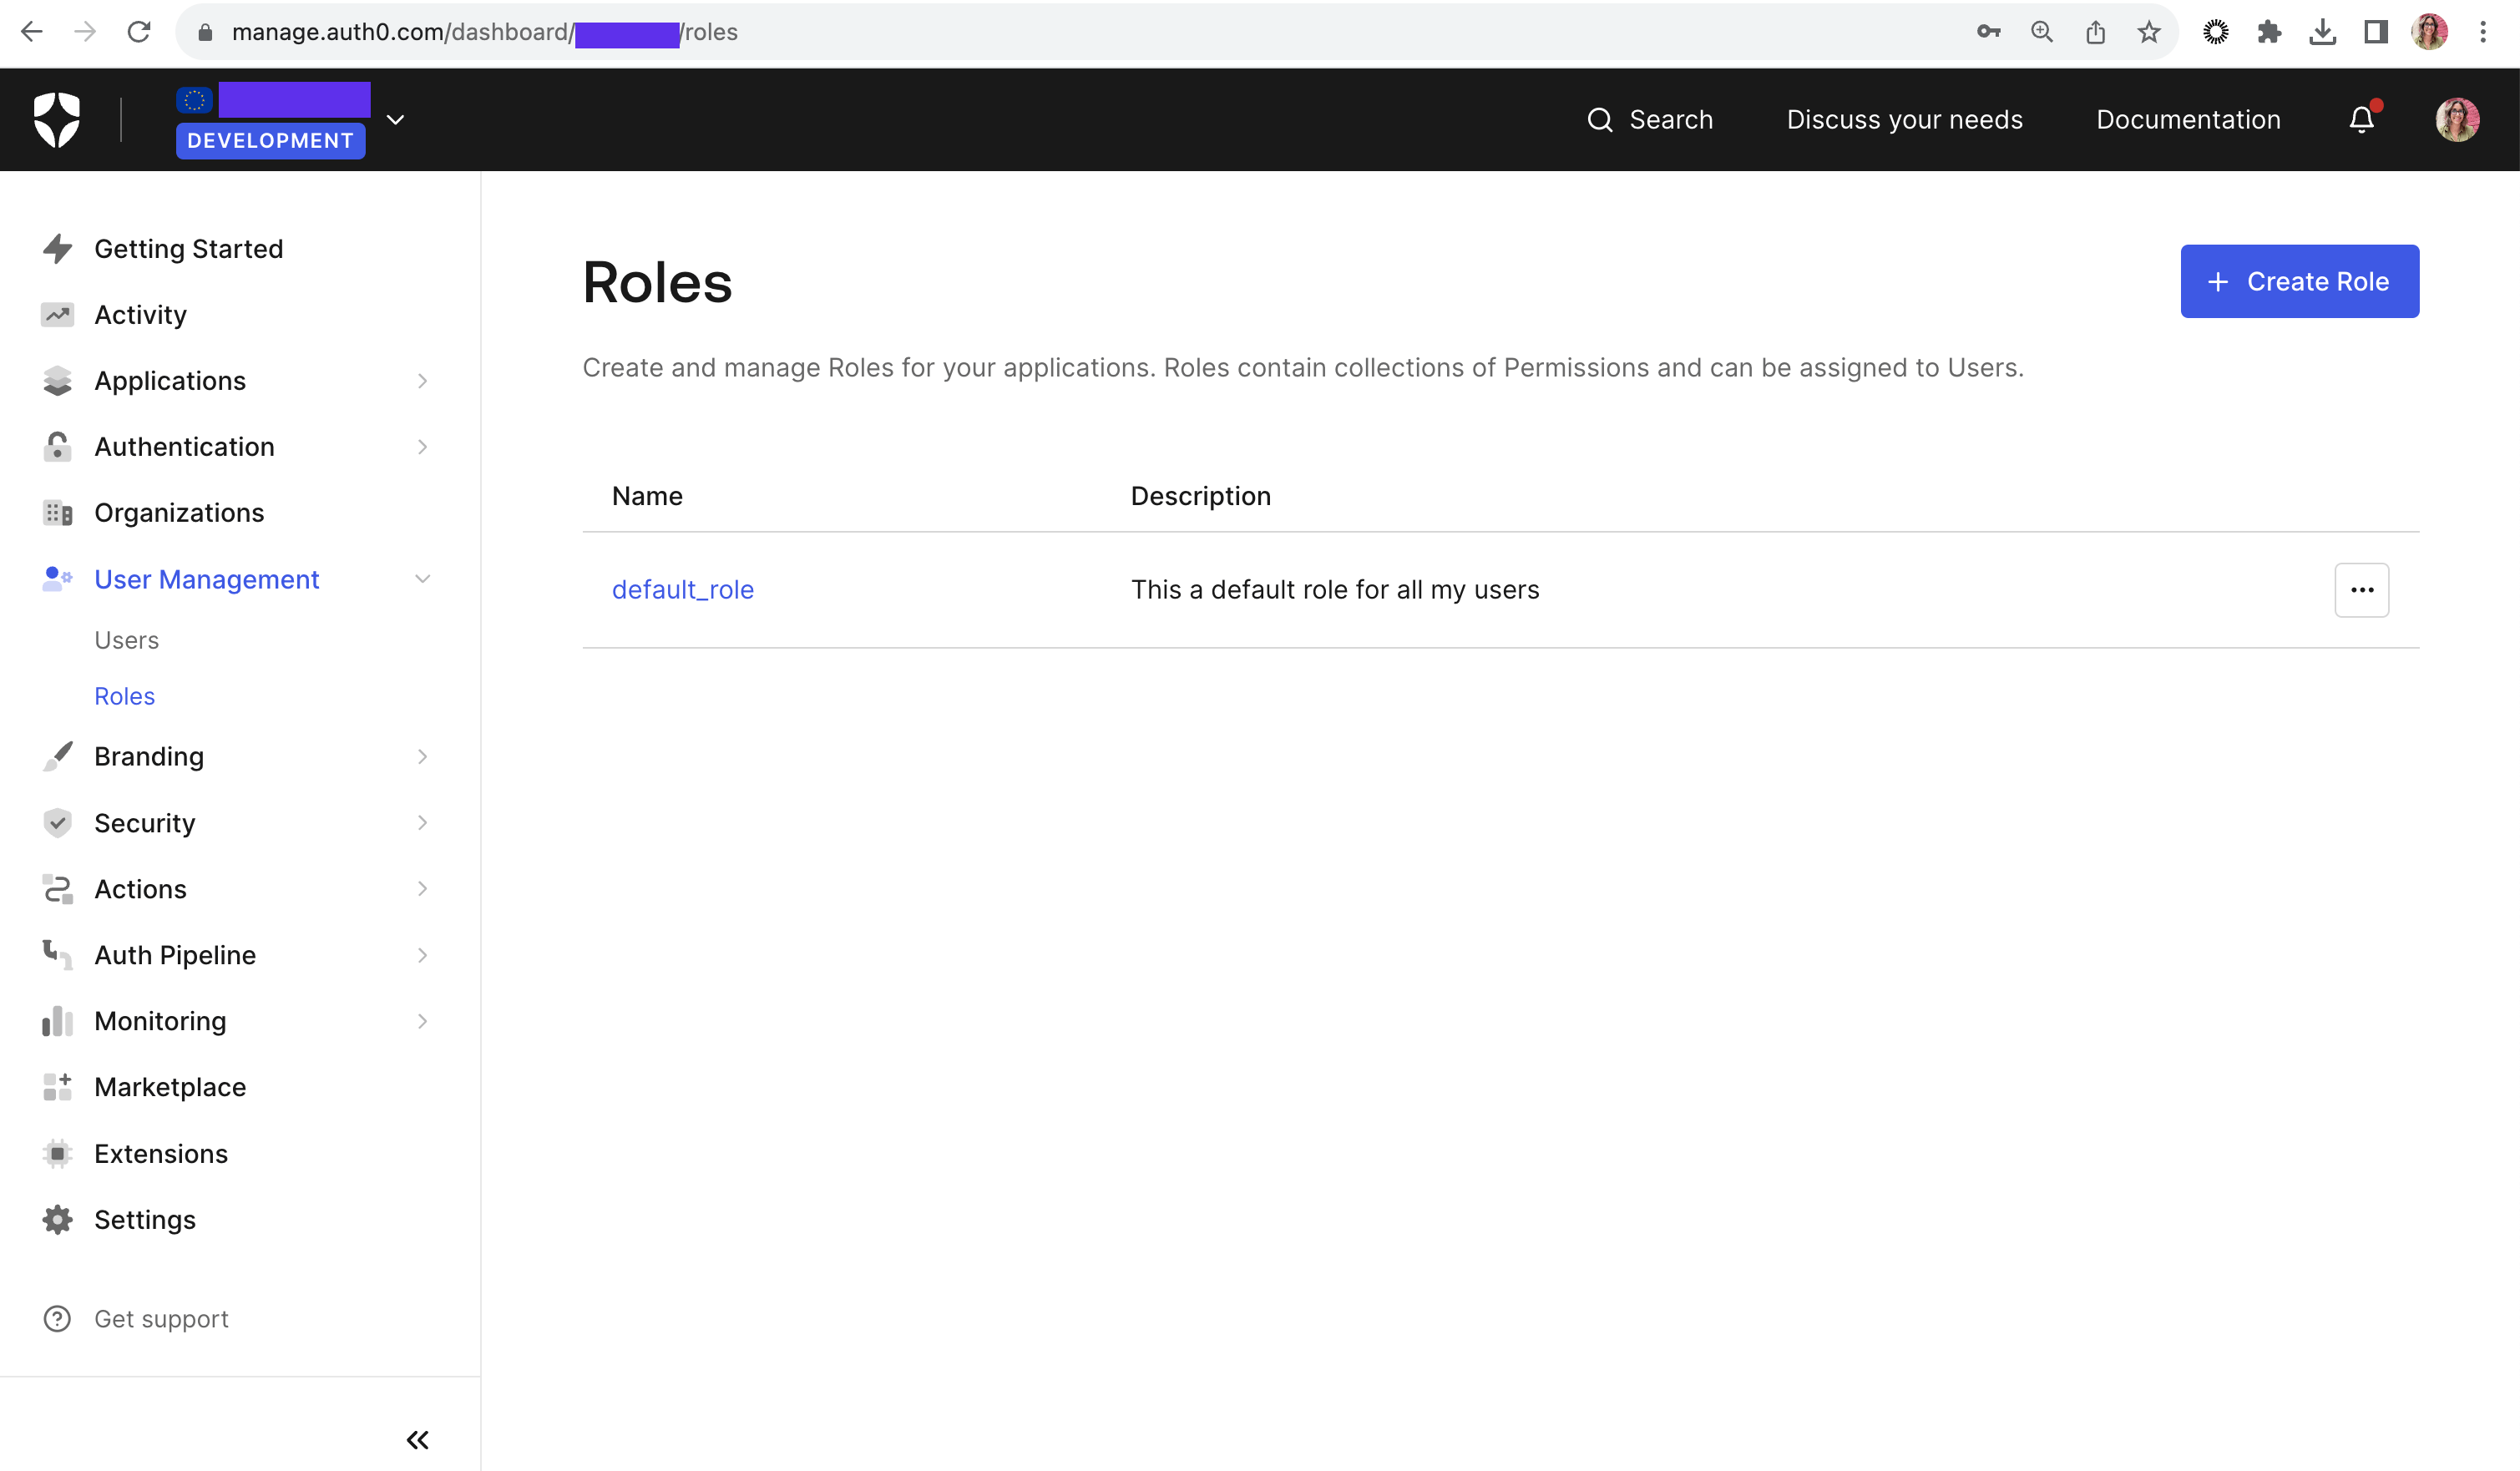 Create a new Role Auth0